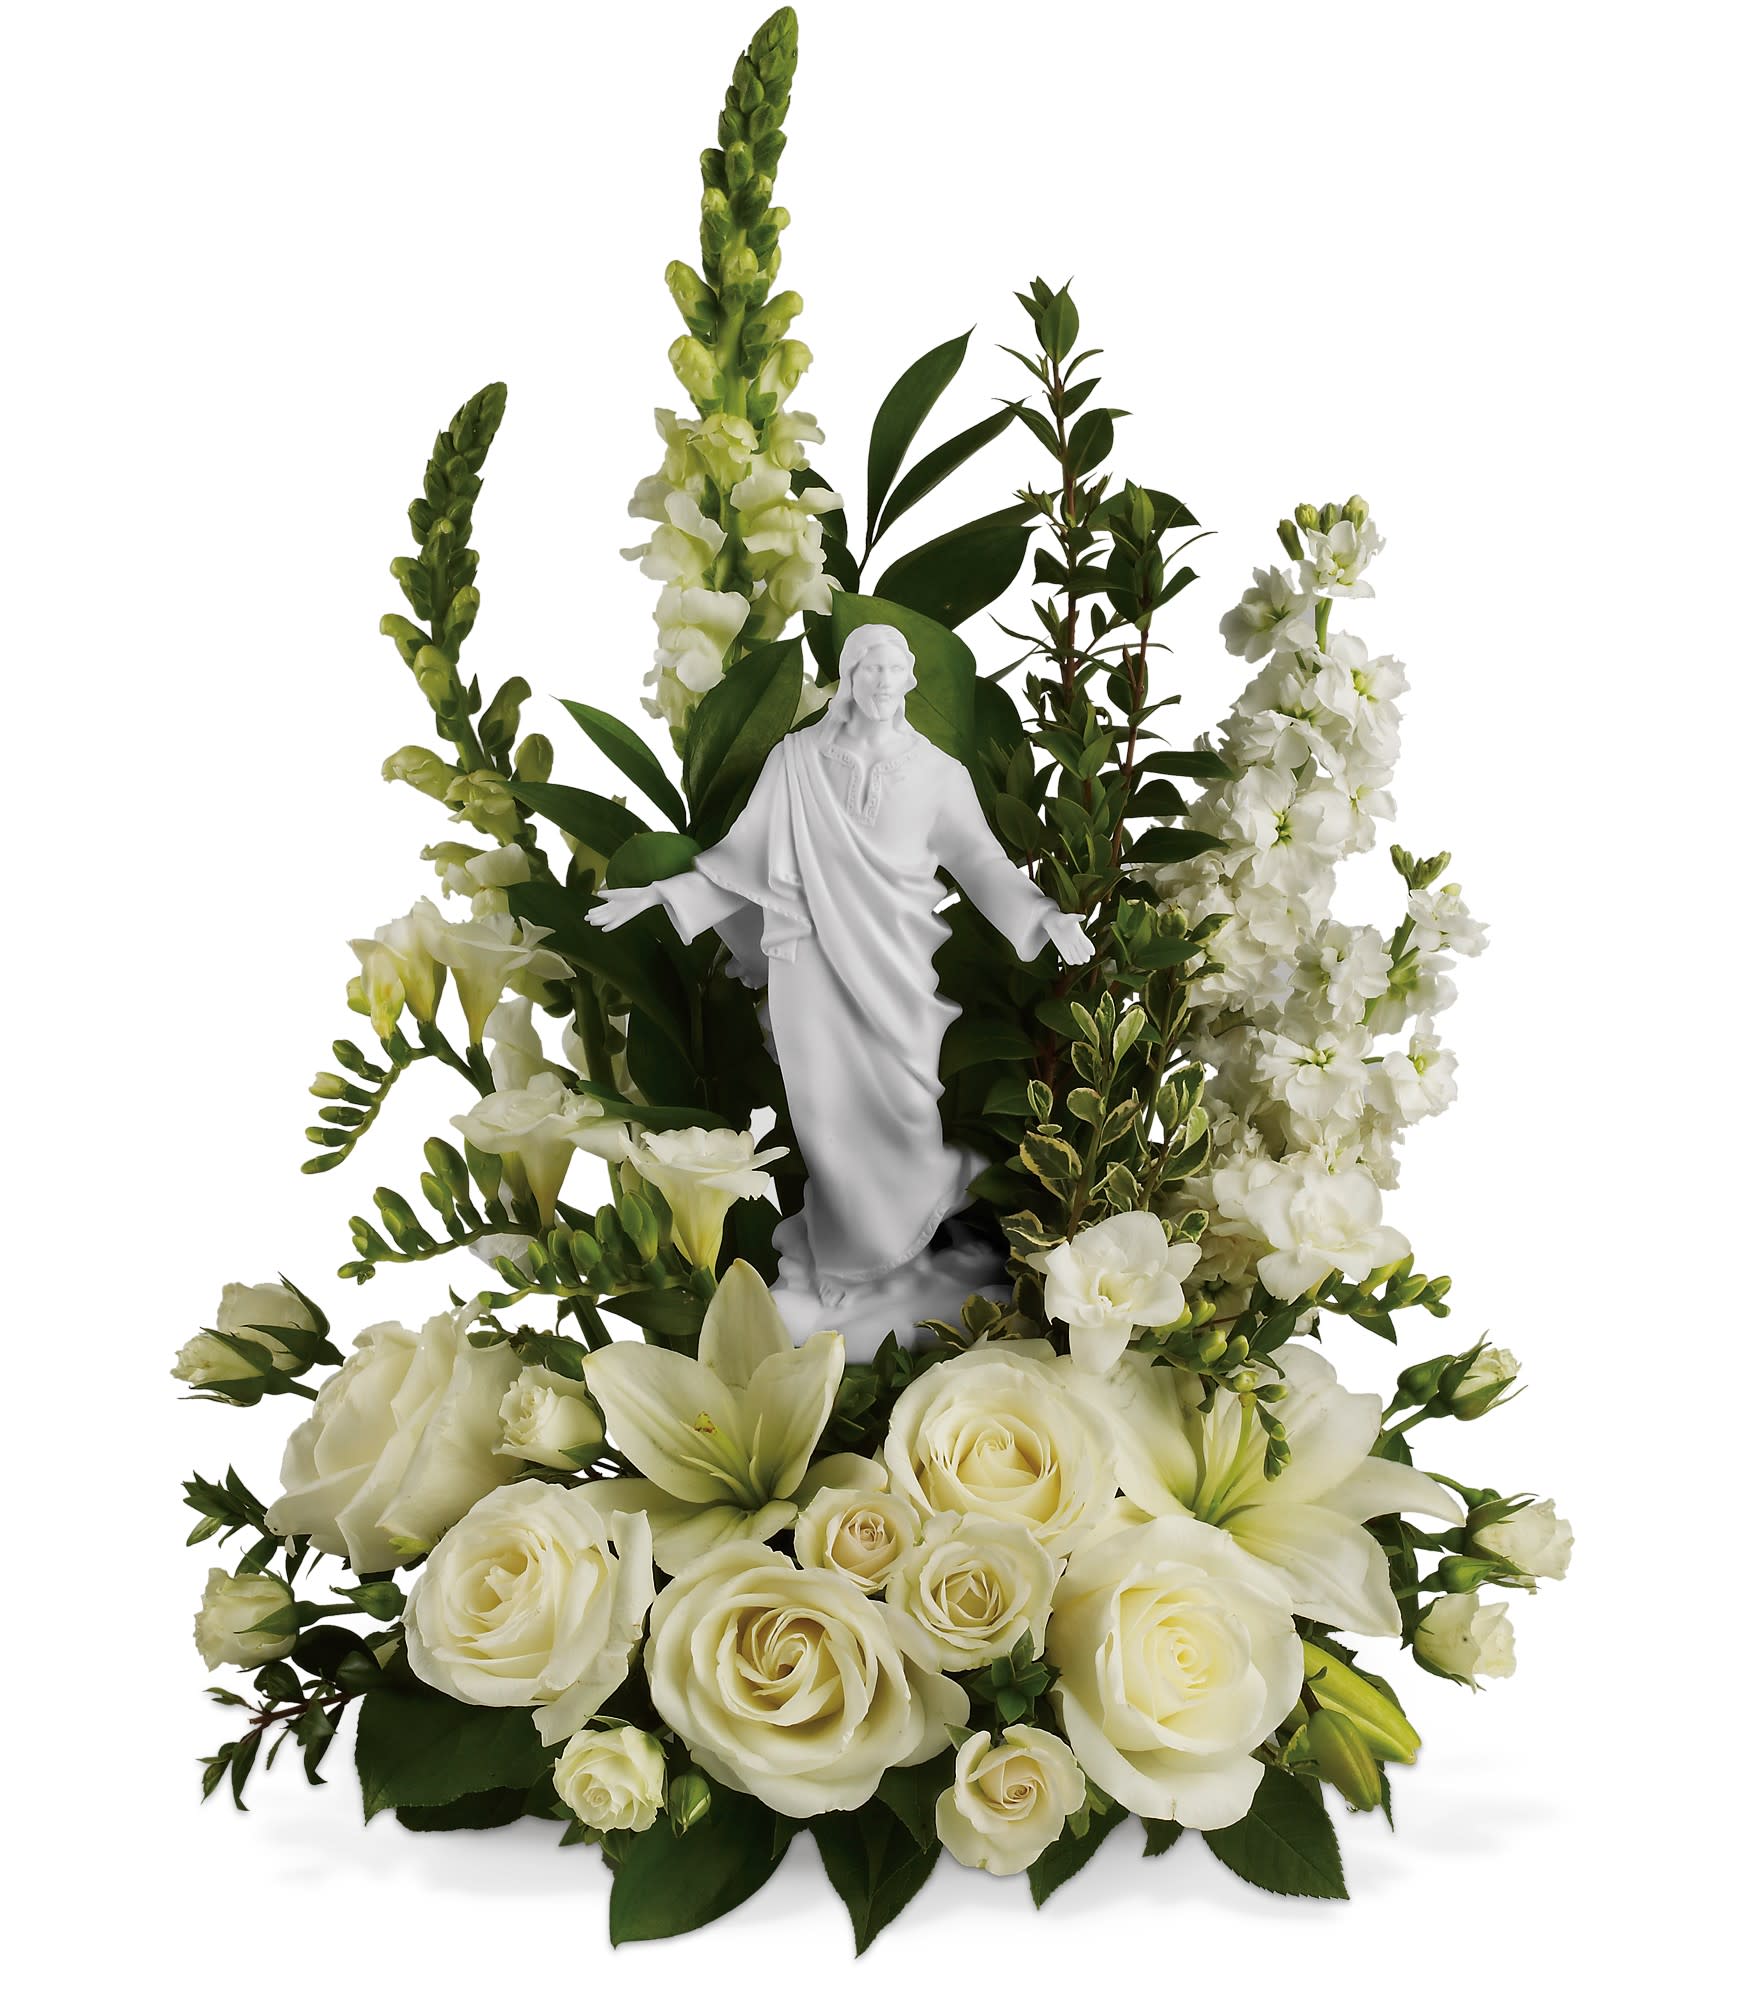 Teleflora's Garden of Serenity Bouquet - This exquisite porcelain sculpture of Jesus surrounded by radiant flowers will be a source of comfort to loved ones during a time of loss. Your thoughtfulness will be long remembered. 